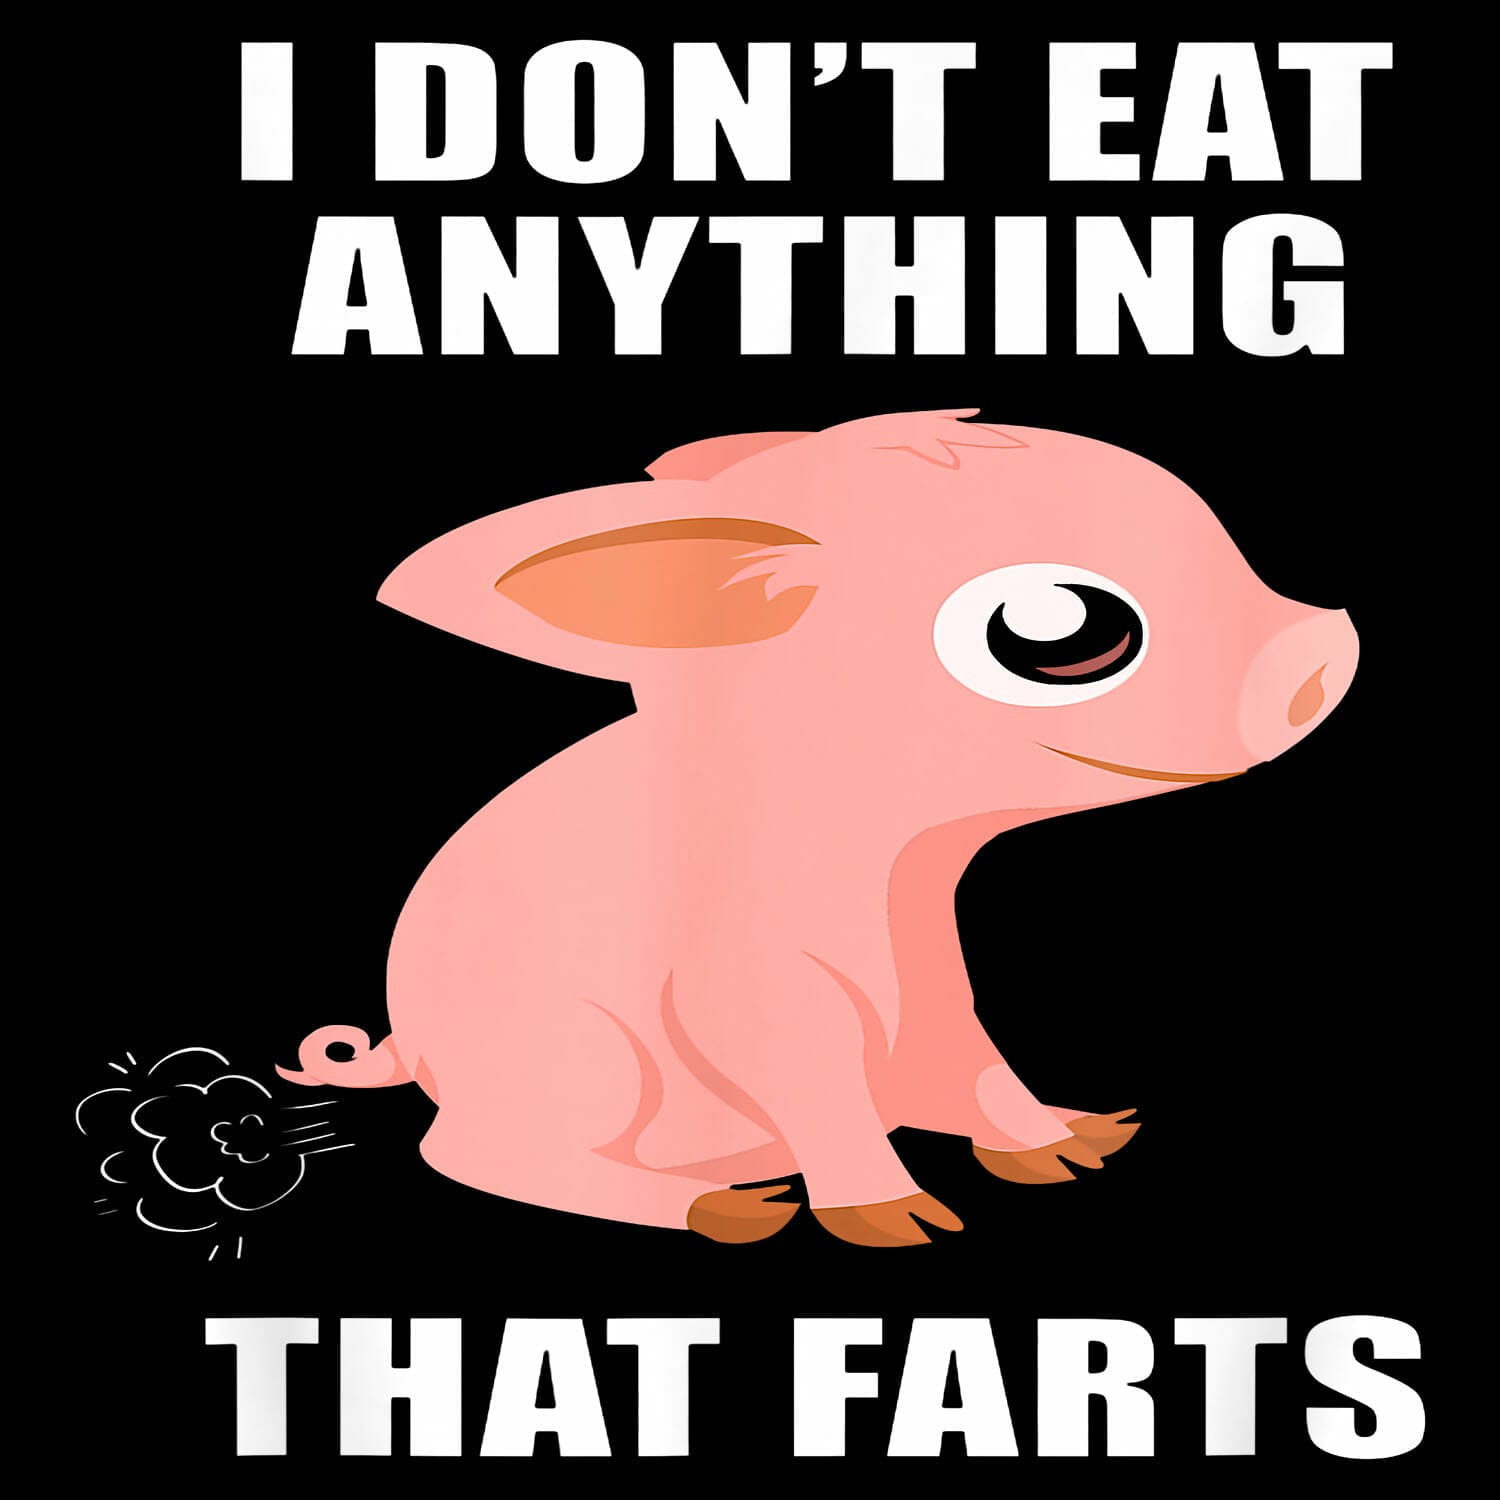 I don't eat anything that farts - tshirt design